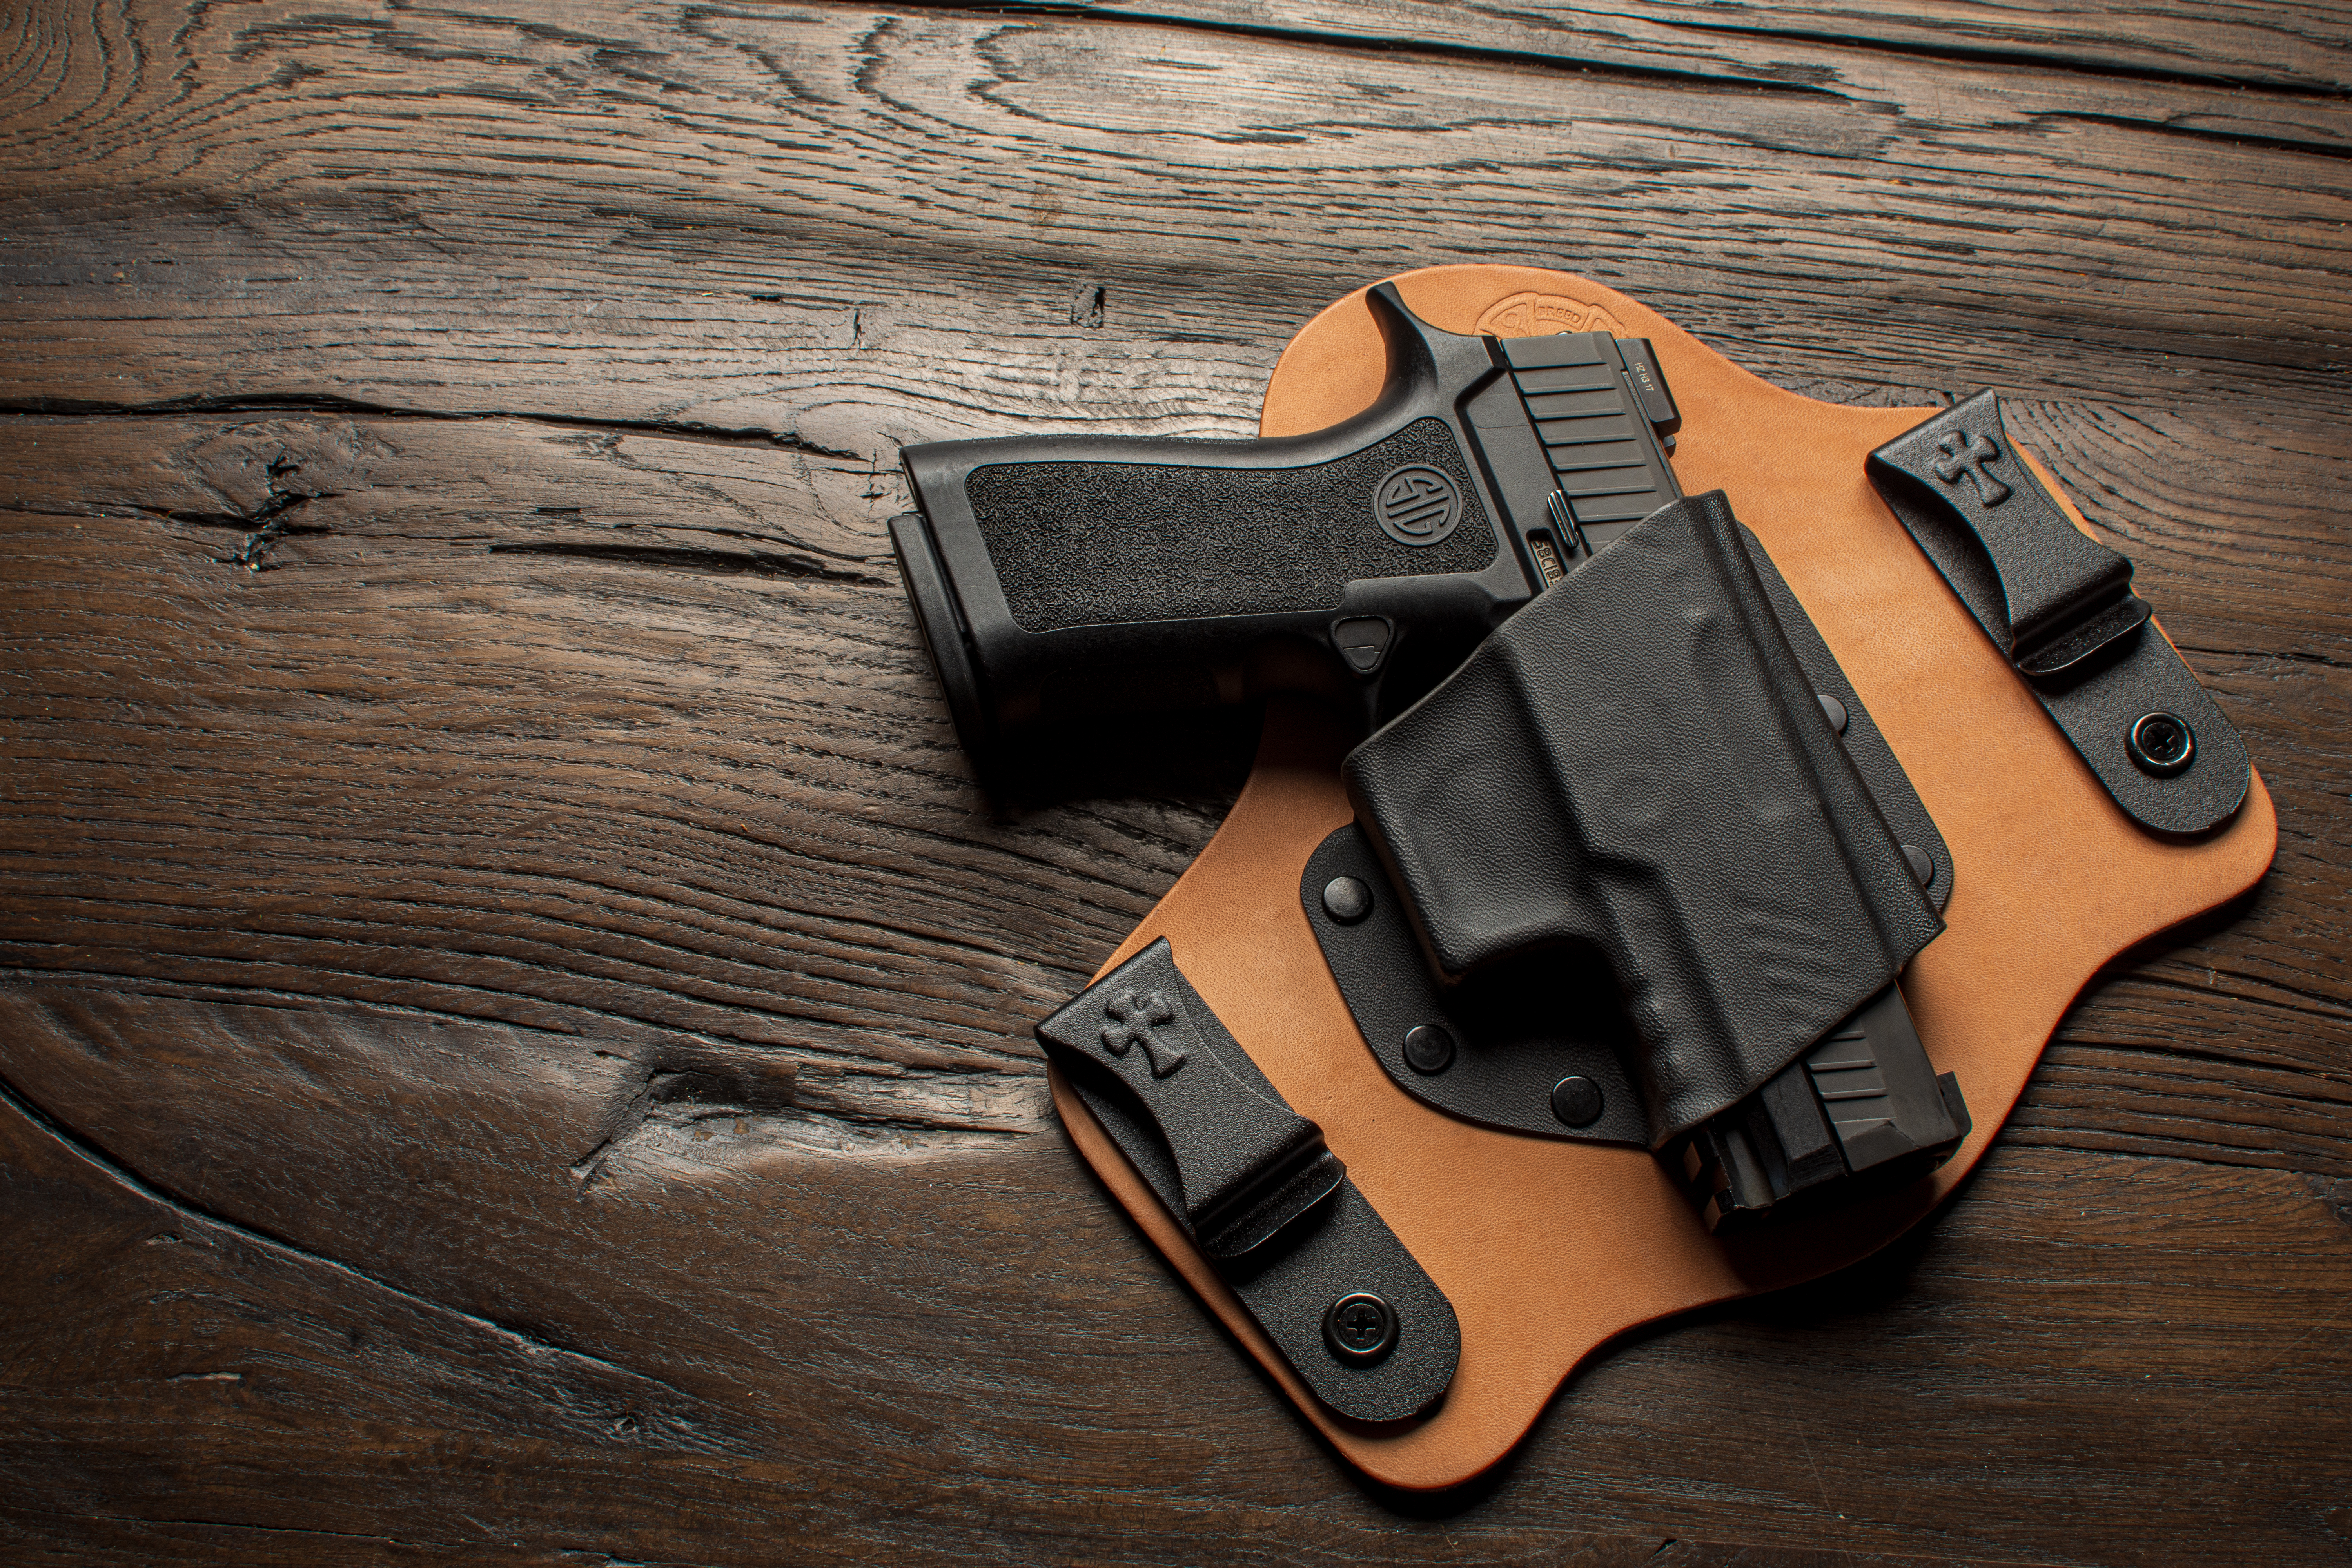 guns, gun sales, best-selling, handguns, pistols, revolvers, NSSF, NICS, 2020 gun sales, pandemic, defund the police, concealed carry, Sig Sauer, P320, P365, Springfield Armory, Hellcat, holsters, CrossBreed Holsters, Smith & Wesson, M&P, Shield, M&P Shield, Beretta, Ruger, Glock, G19, G43, Springfield Hellcat, XD, XDM, Kimber, 1911, 2020 gun sales, self-defense gun, Ruger 57, M9A3, IWB, OWB, IWB Holsters, best-selling guns, 